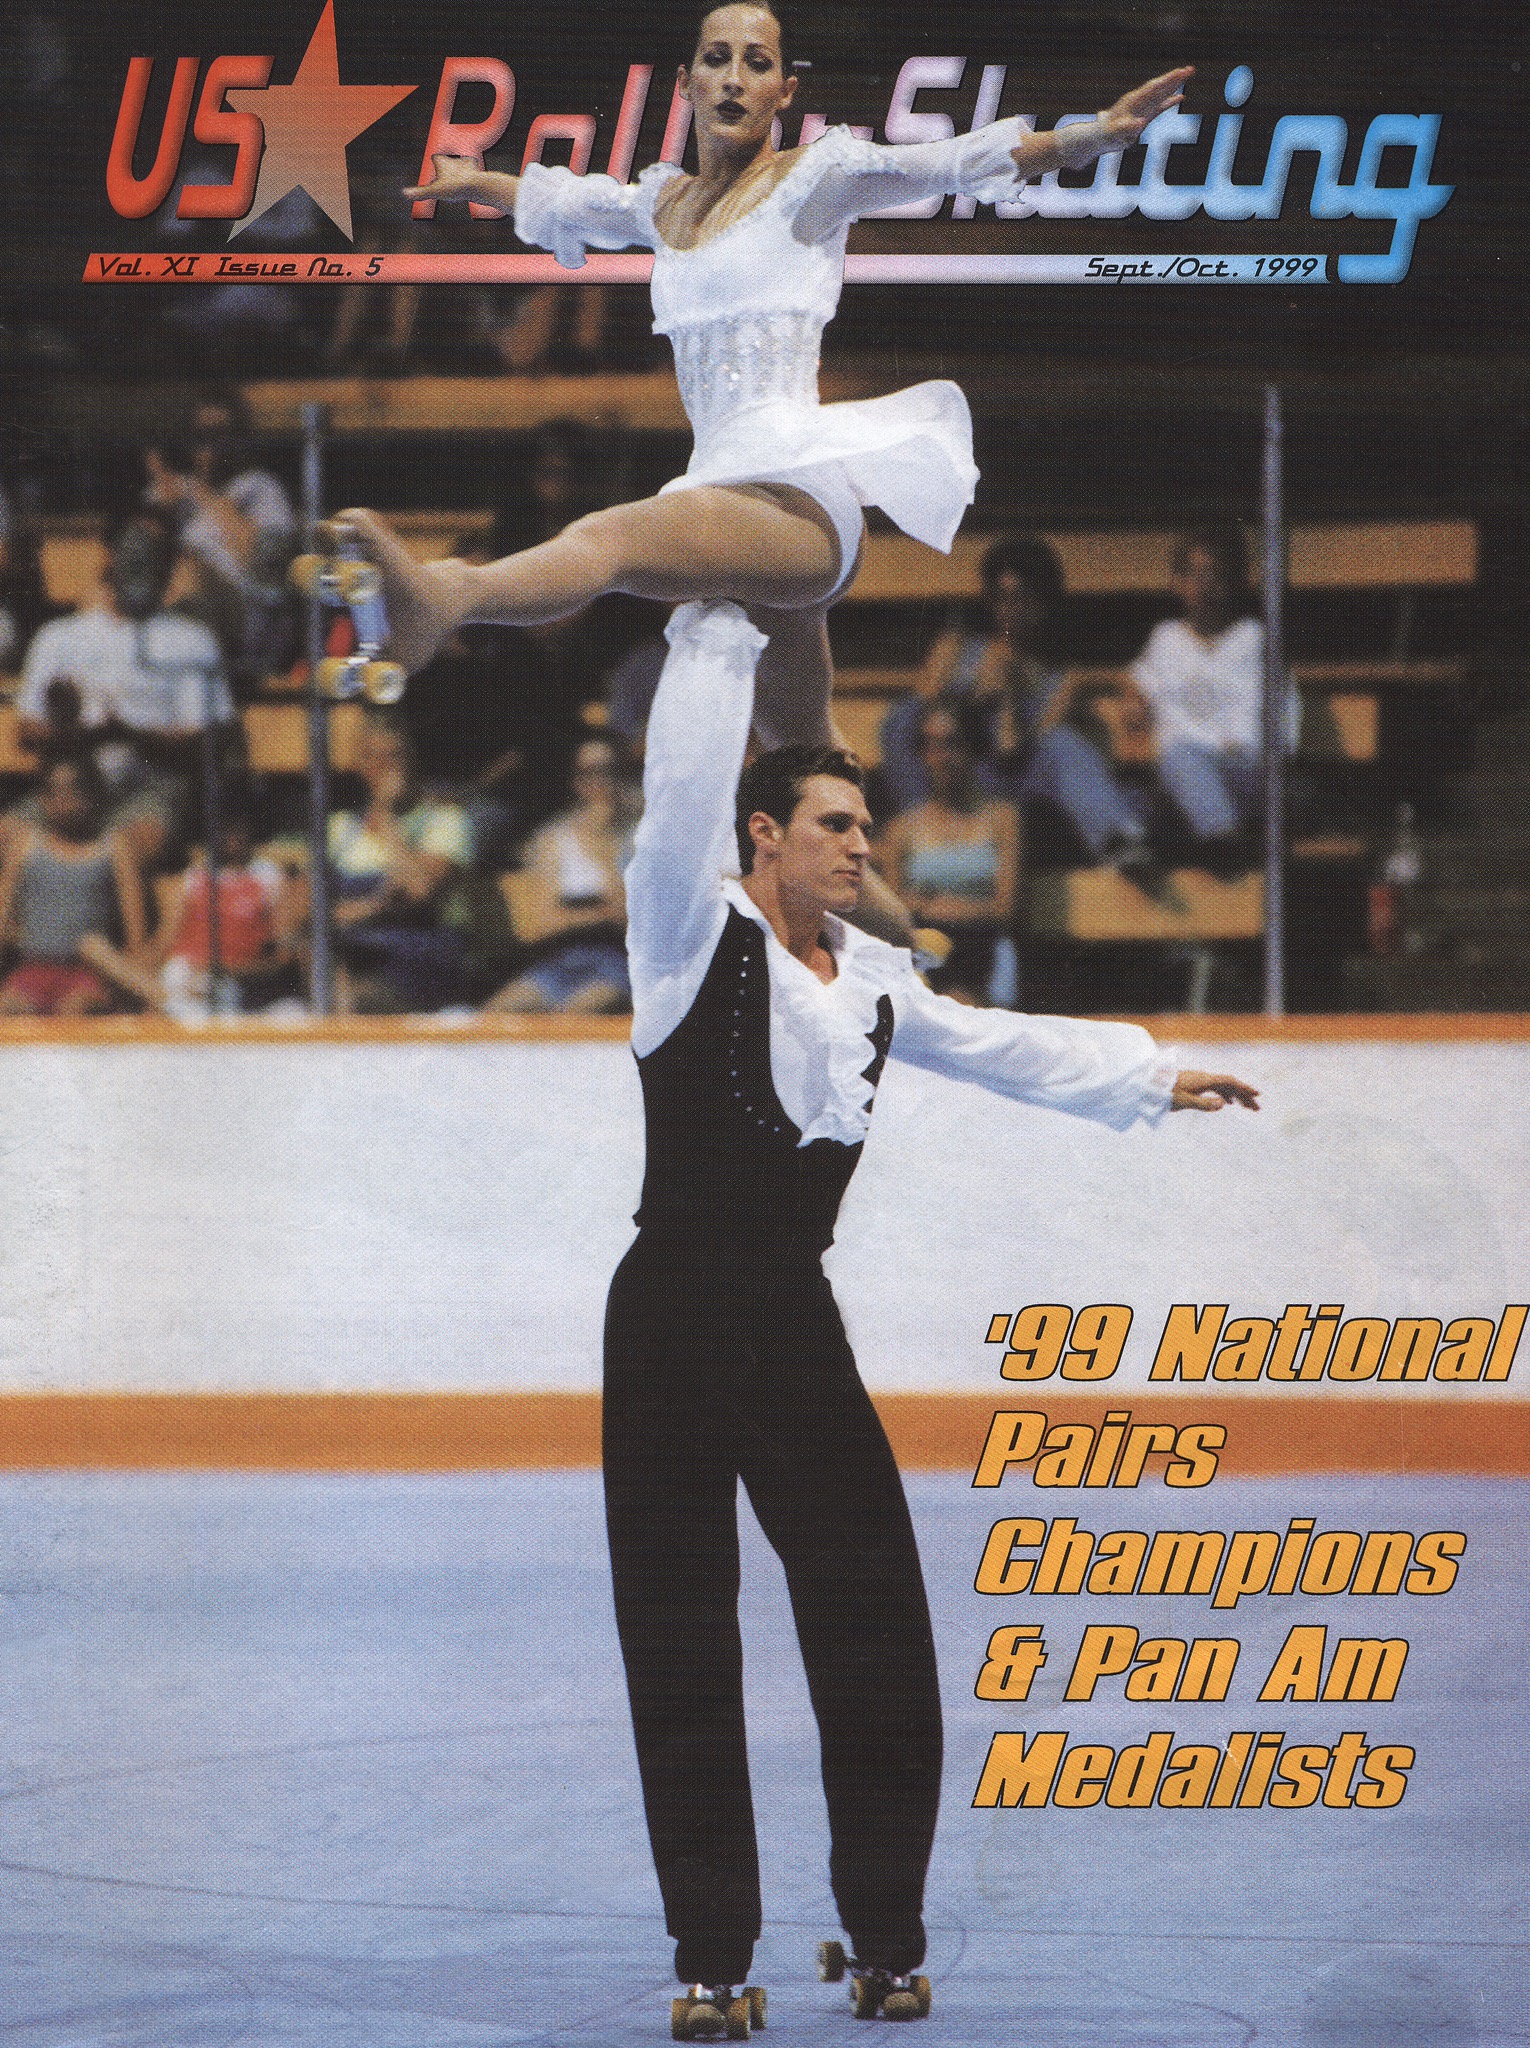 April featured on the cover of US Roller Skating's September/October 1999 Issue